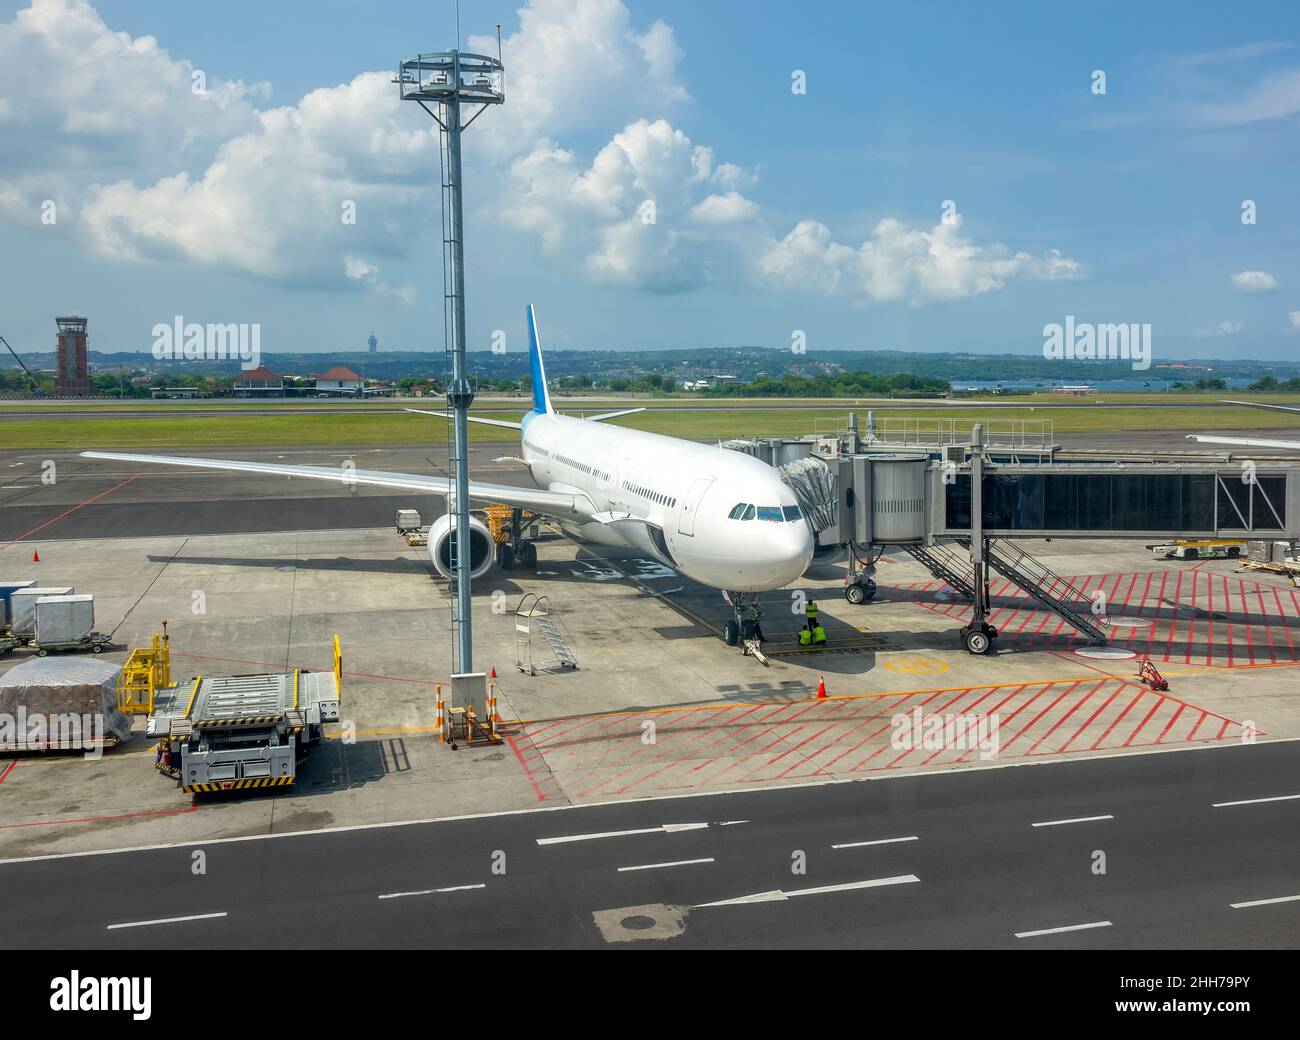 Sunny day at the Indonesian airport. An aircraft with an attached jet bridge for boarding and disembarking passengers. Ocean and jungle in the backgro Stock Photo